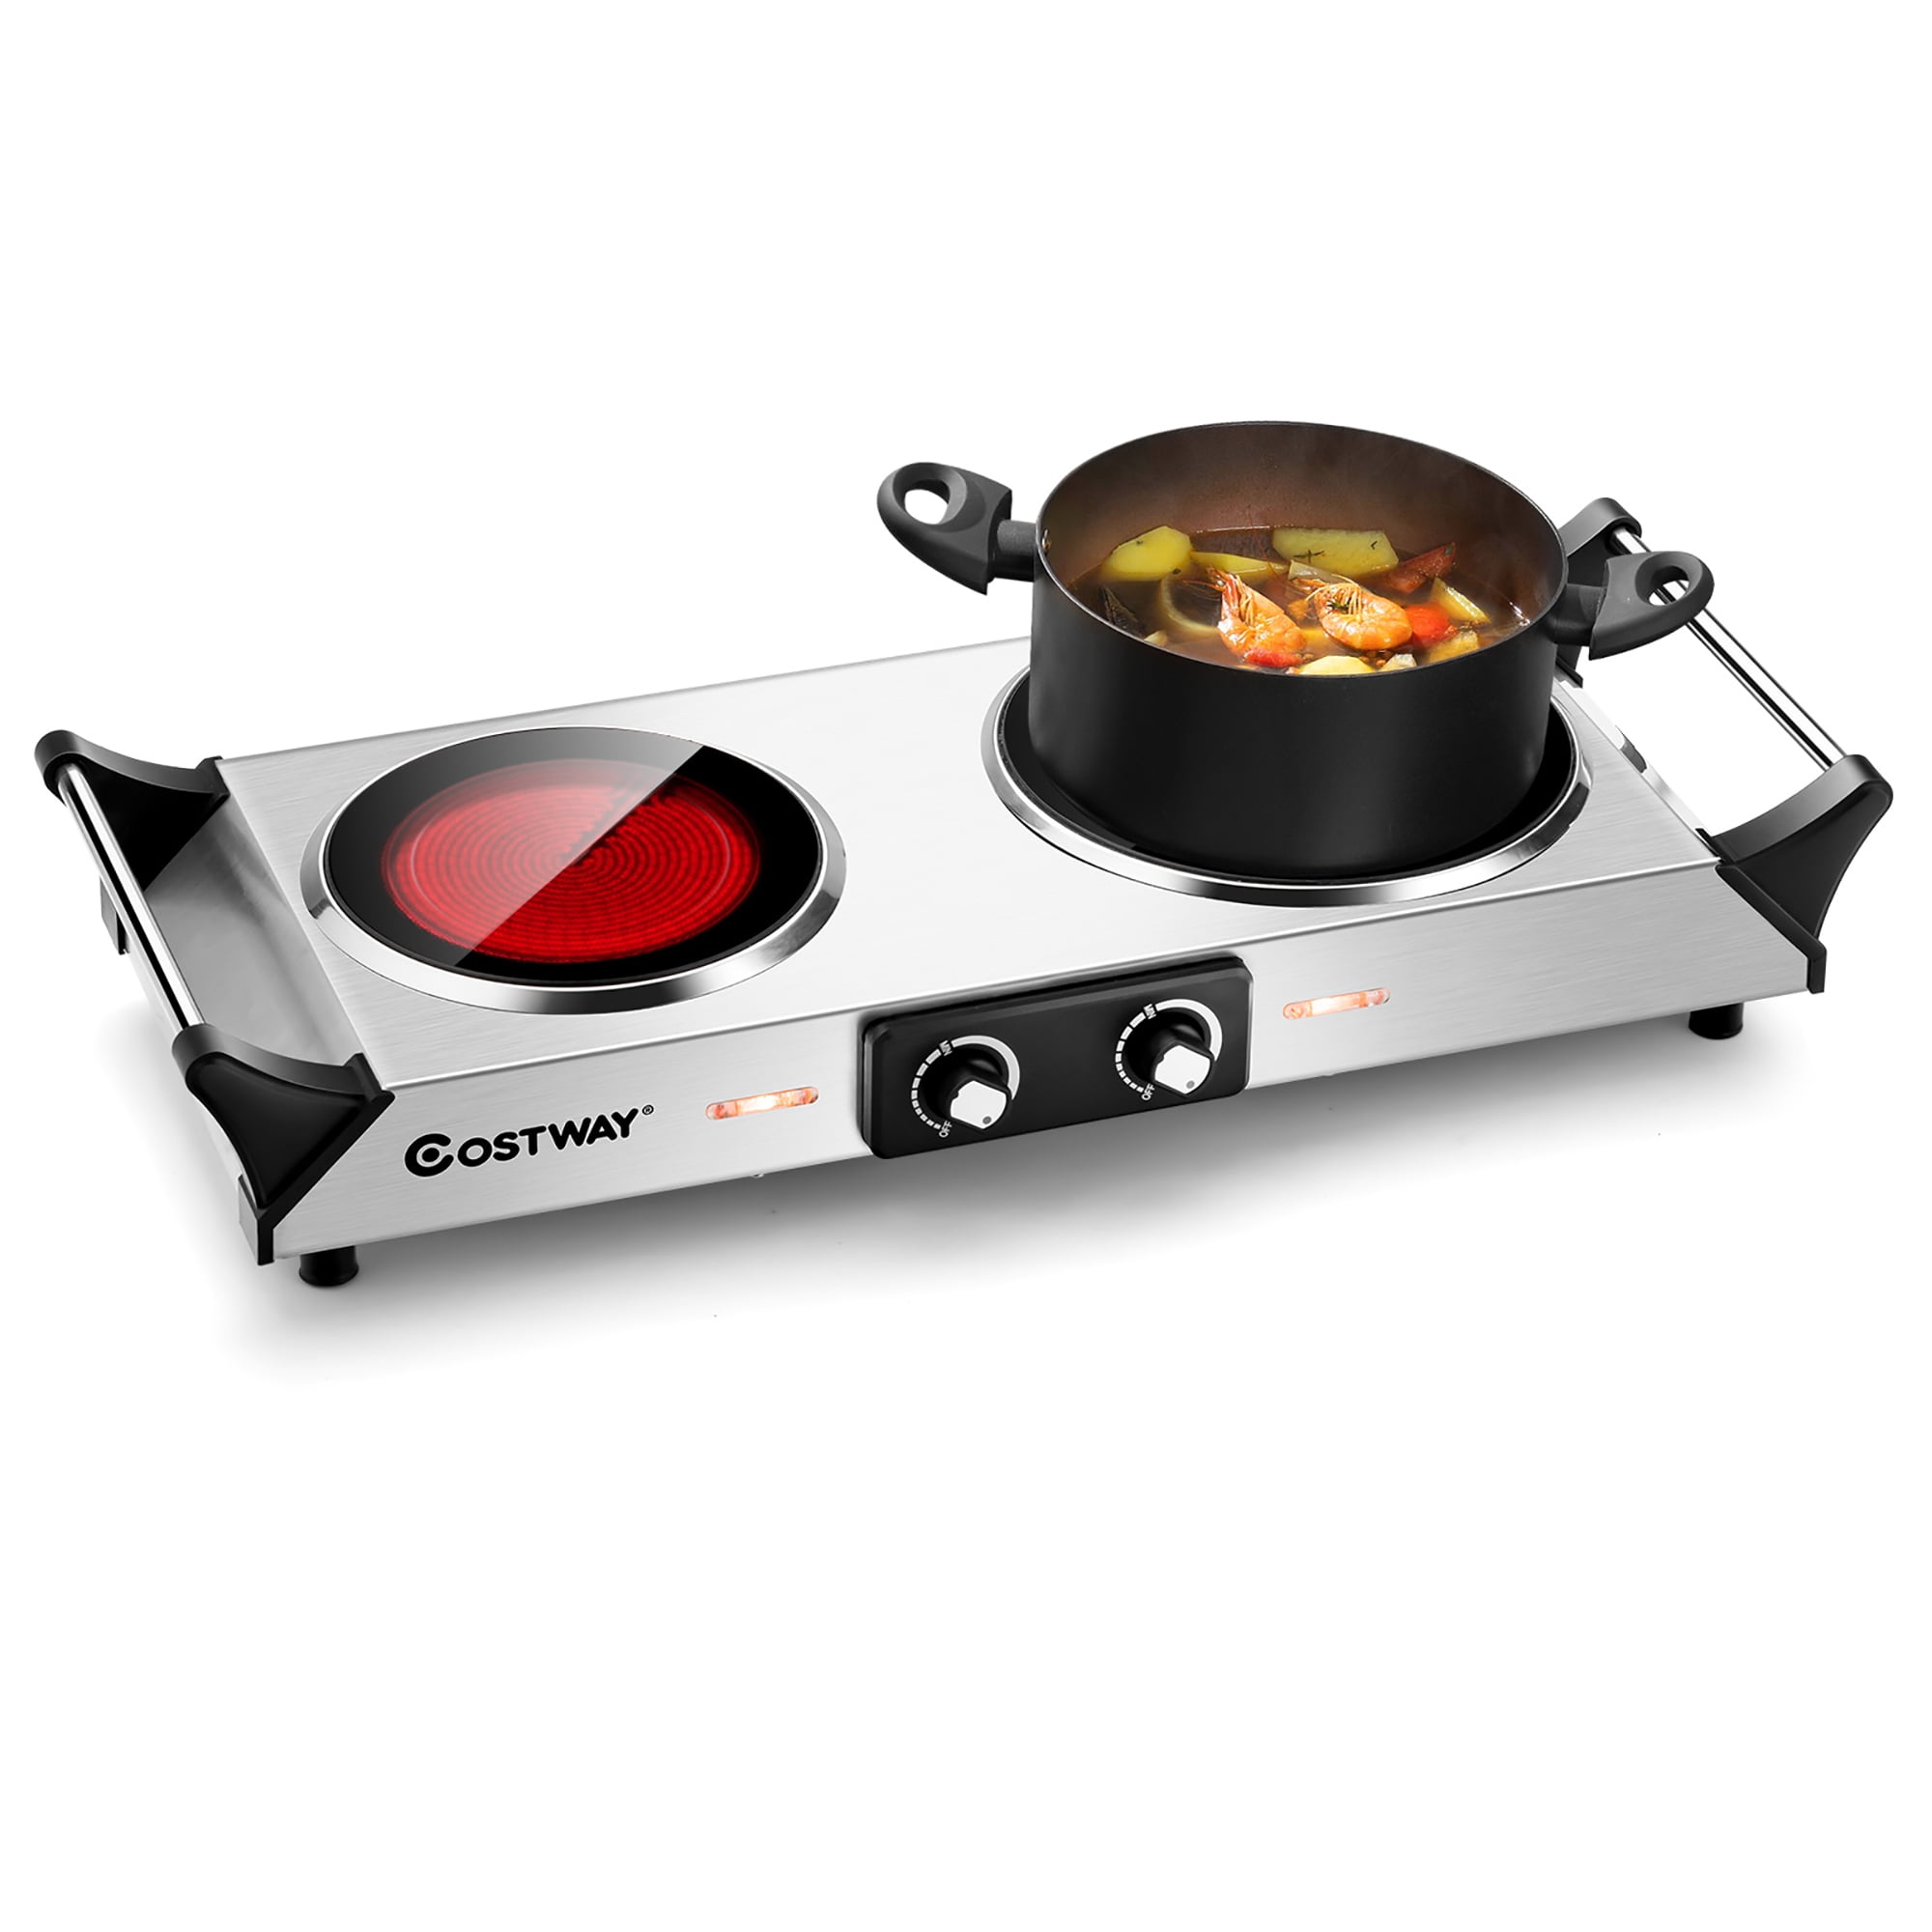 Electric Double Stovetop Hot Plate for Cooking 1800W 7.3/4 Glass Cast Iron Portable Stove Burners Cool Touch Handle Cooktop Keeps Food Warm